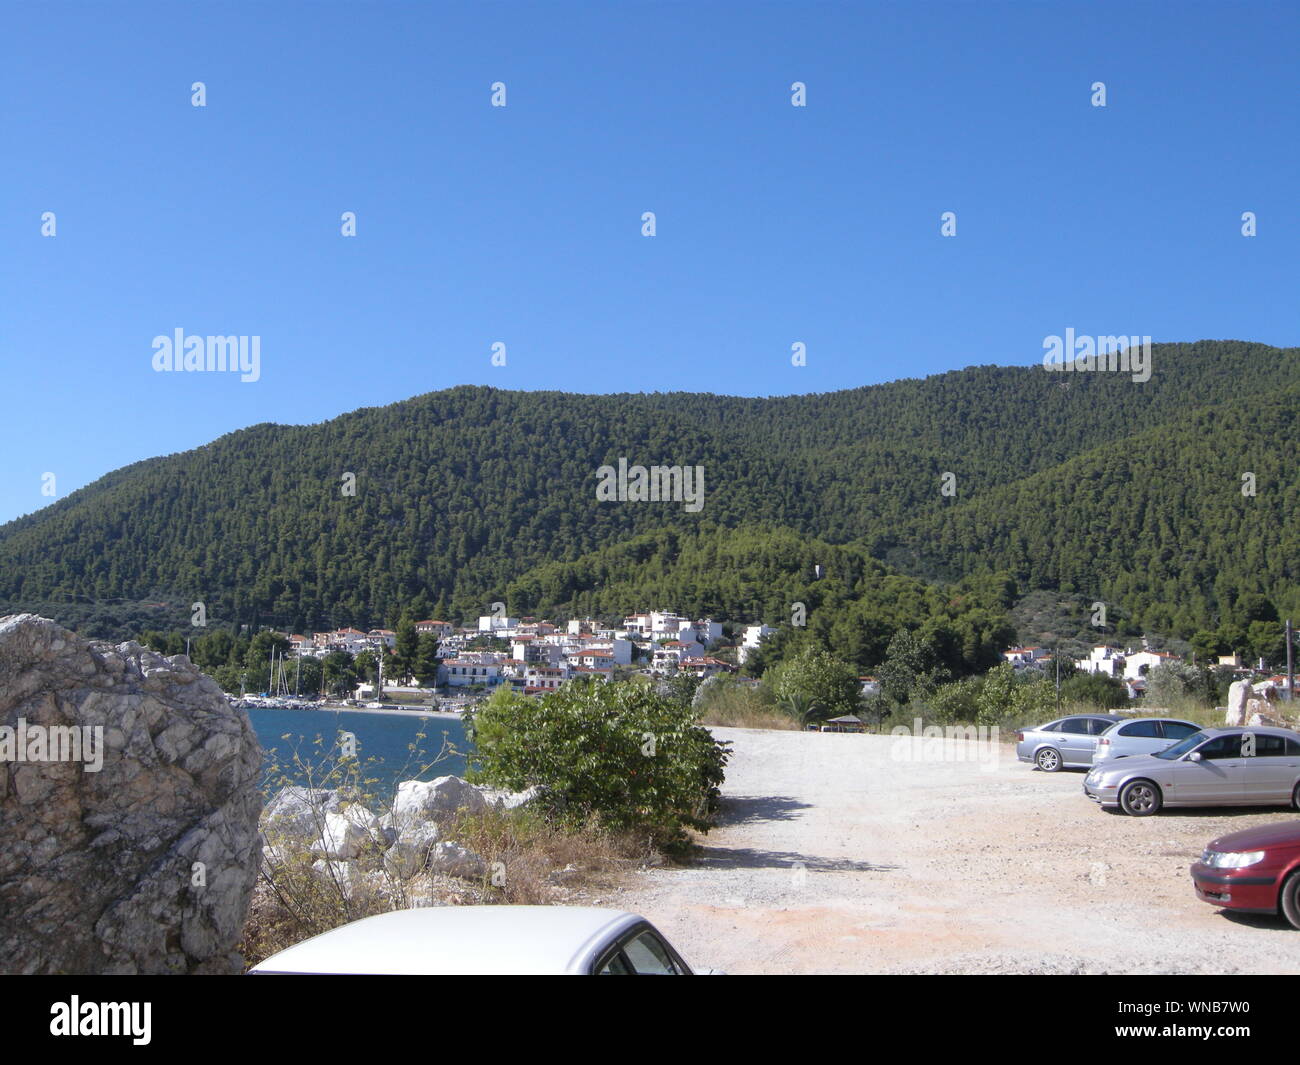 Cars Parked In Lot Next To Sea With Hills In Background Stock Photo